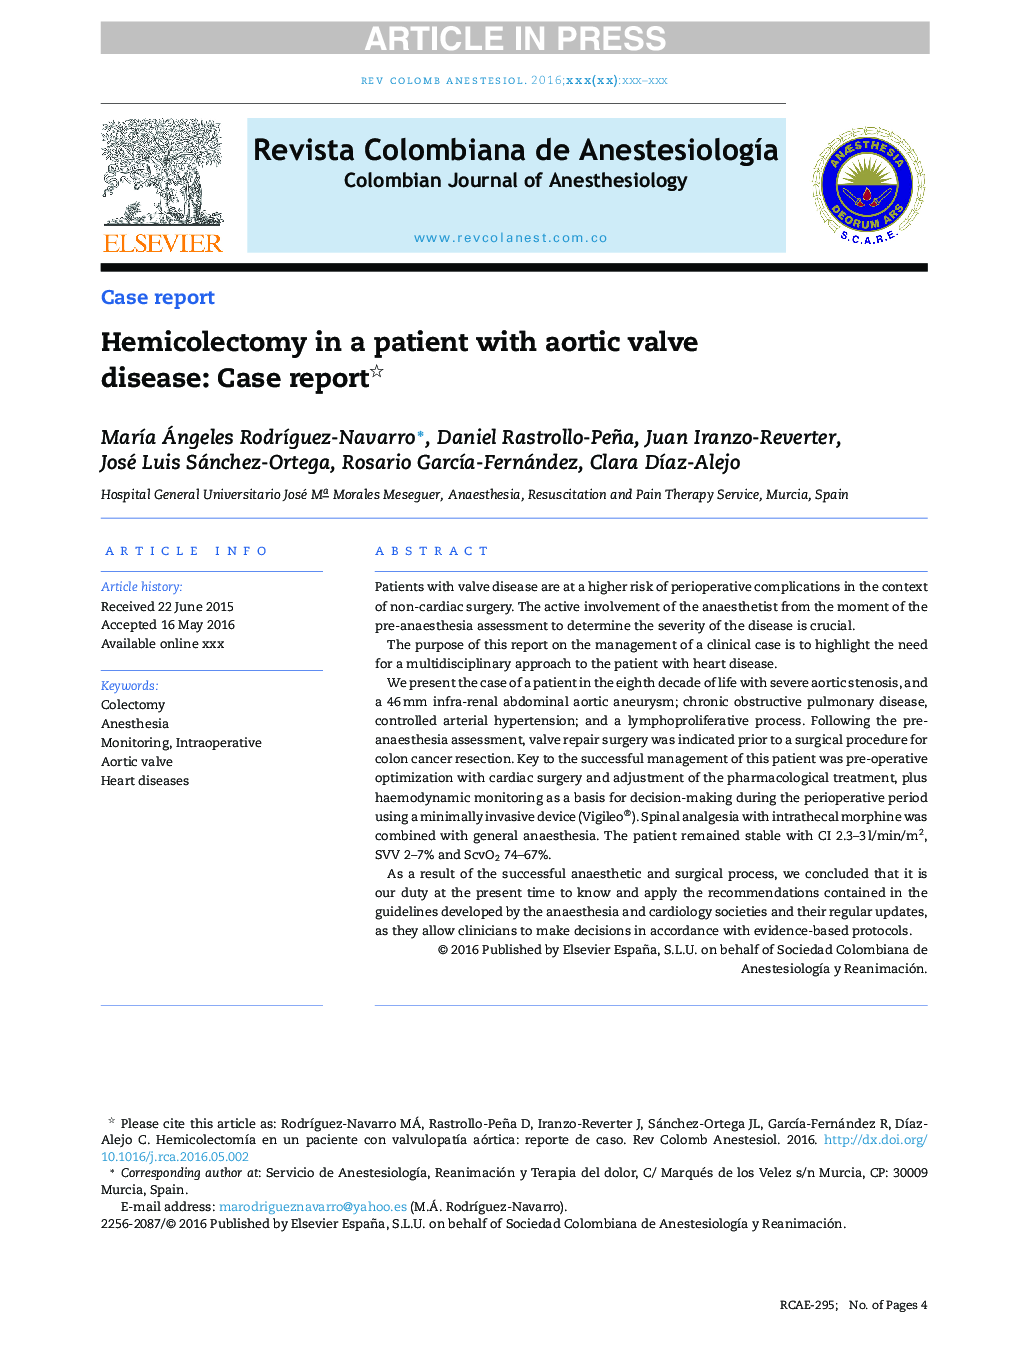 Hemicolectomy in a patient with aortic valve disease: Case report